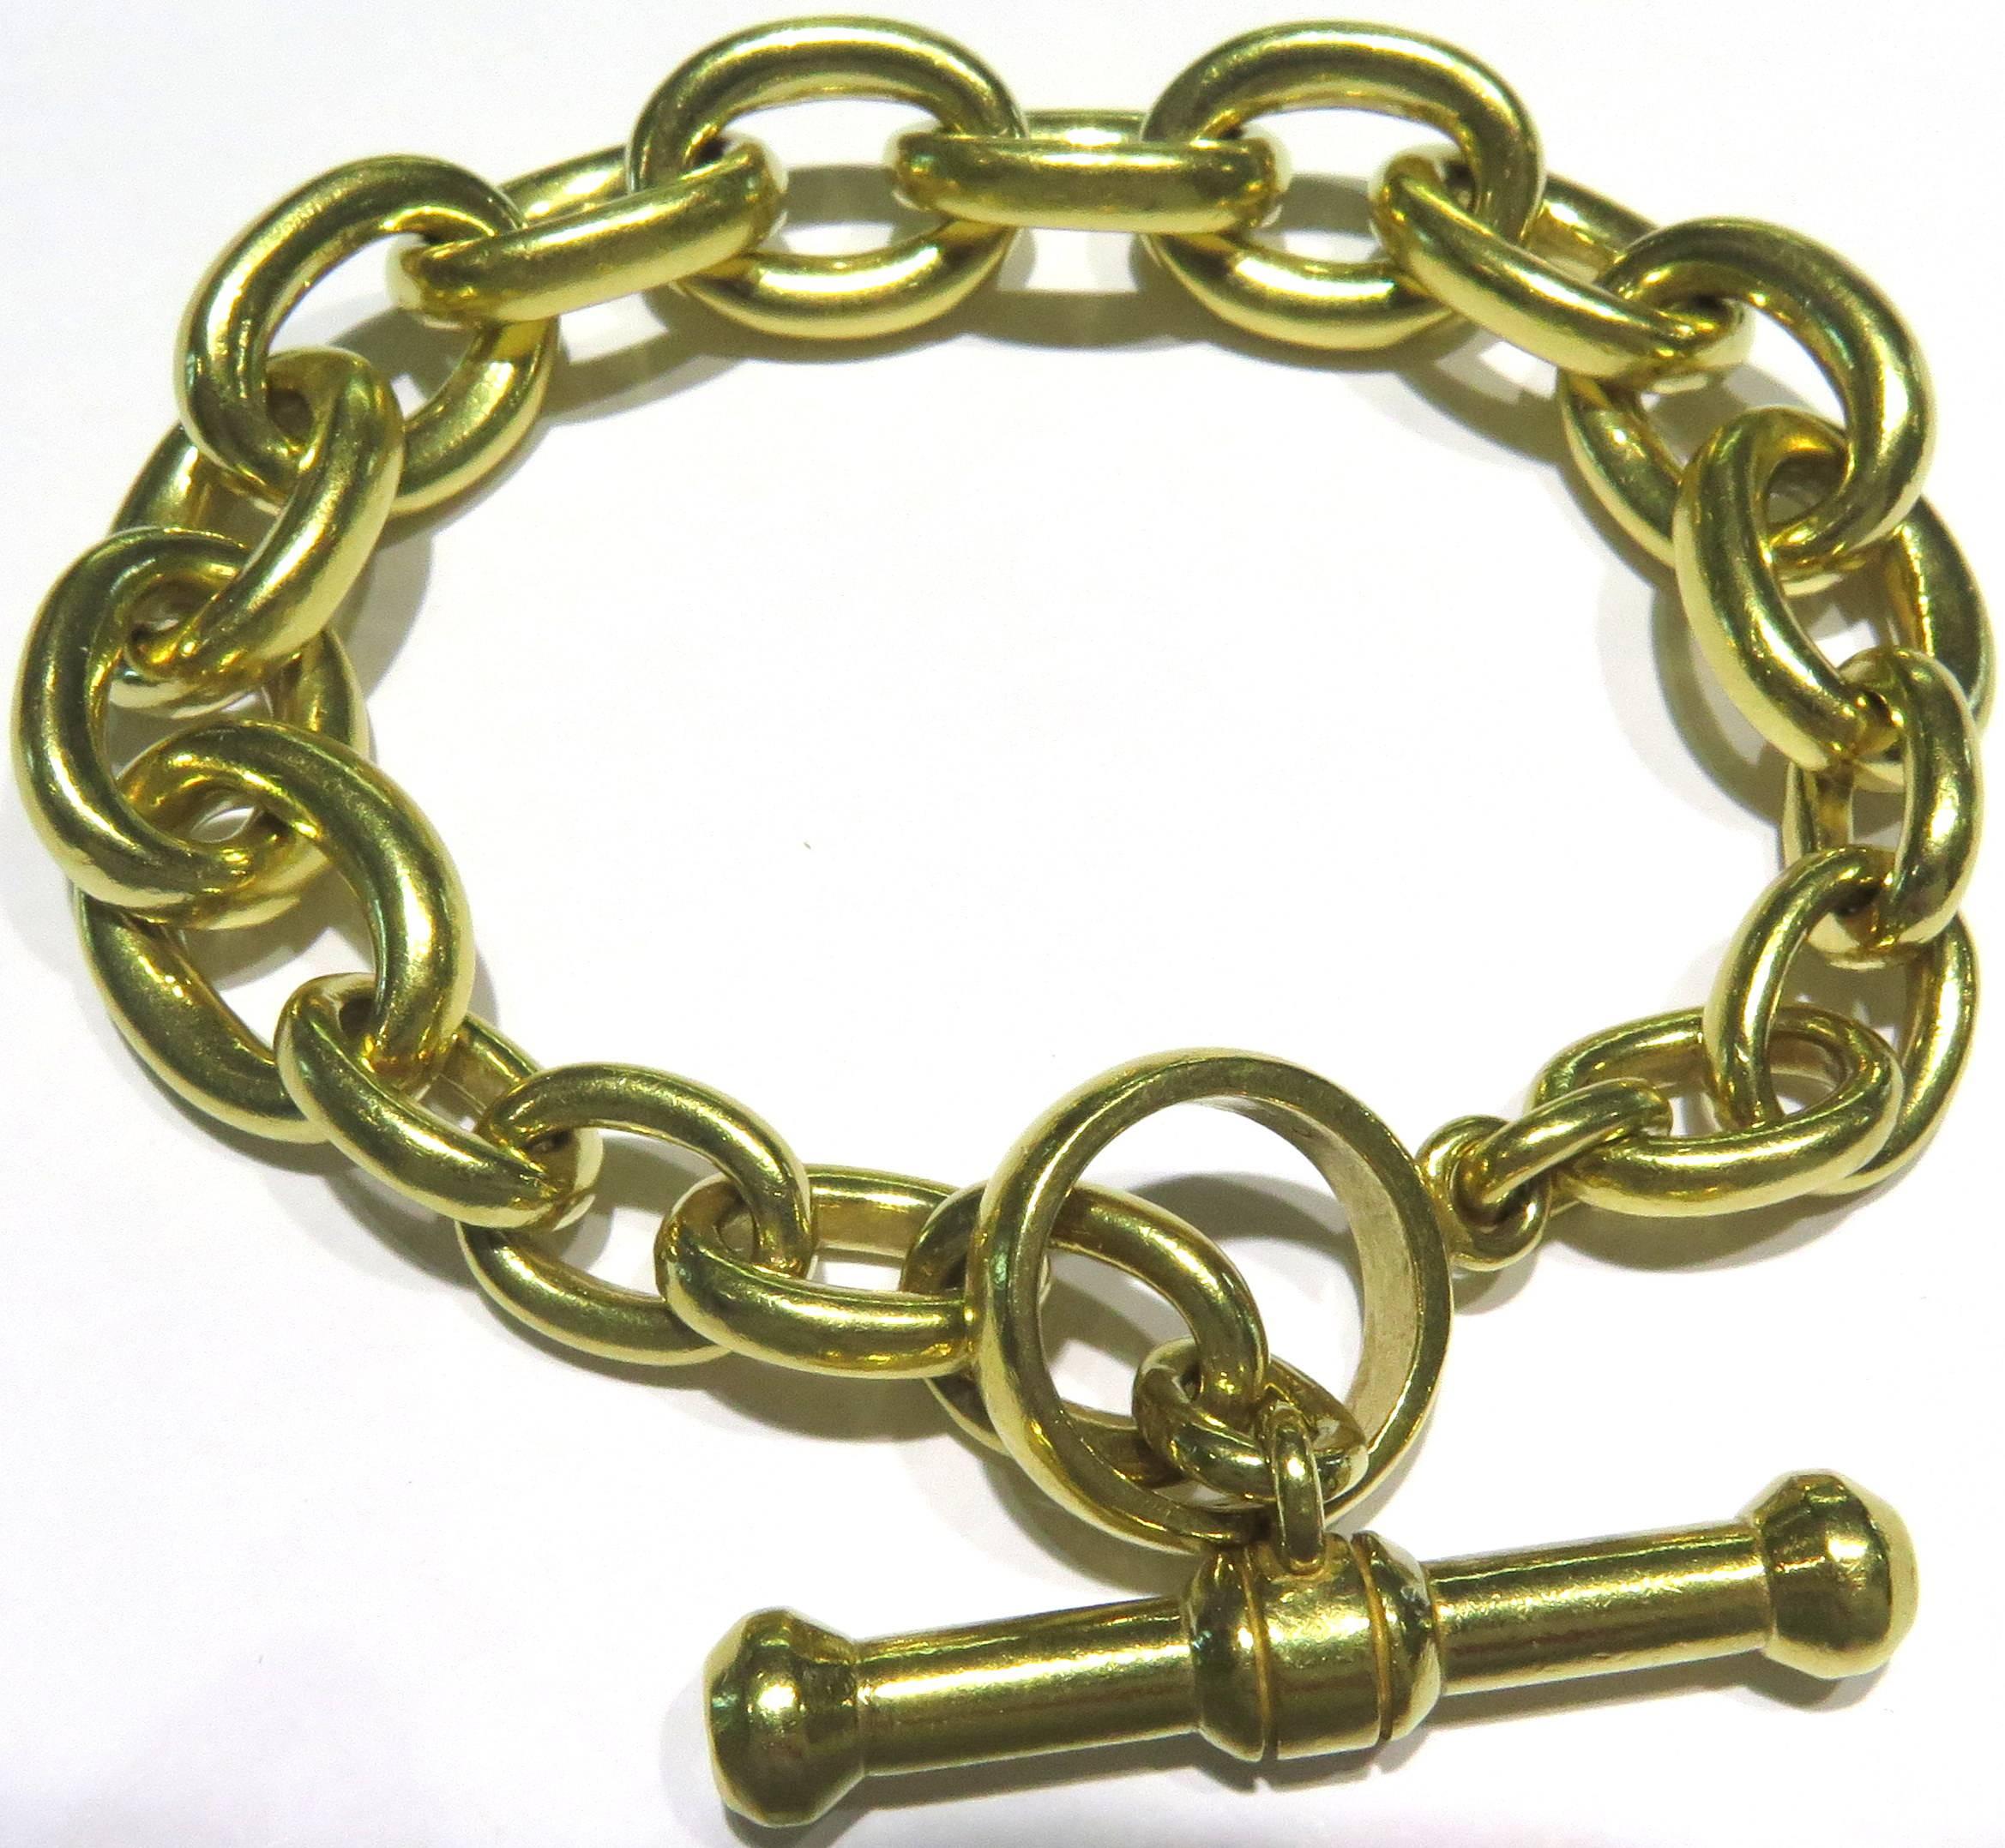 1984 Classic Early Kieselstein Cord Exceptionally Heavy Gold Toggle Bracelet 5